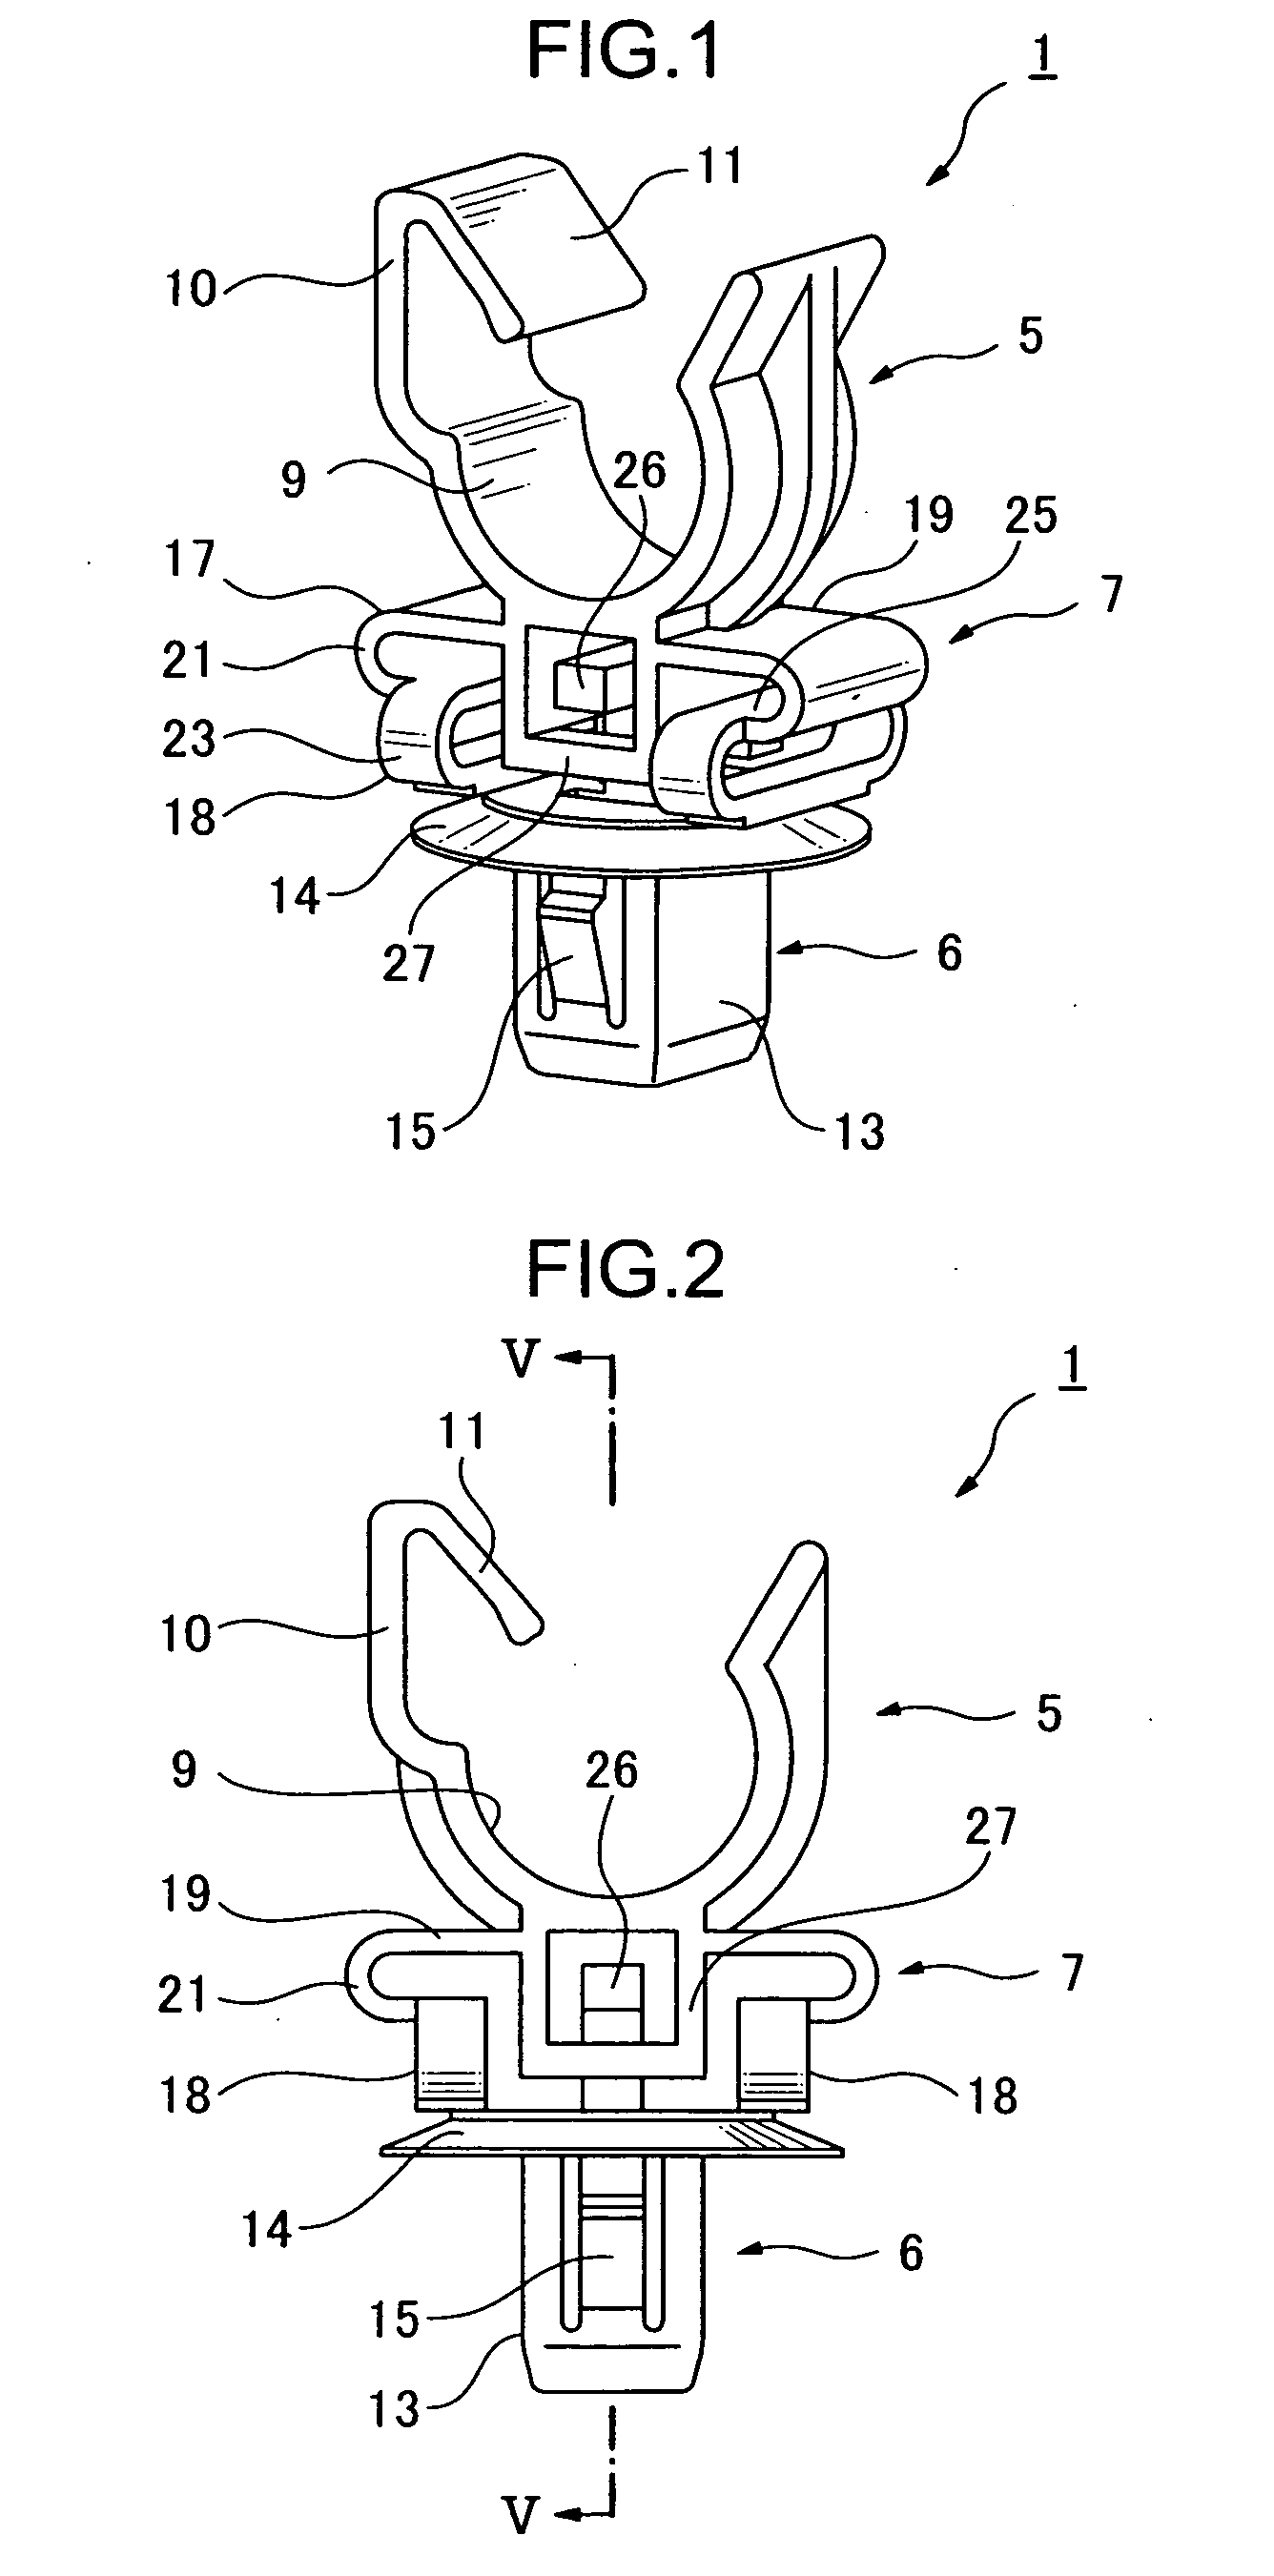 Clamp for elongated objects such as pipe